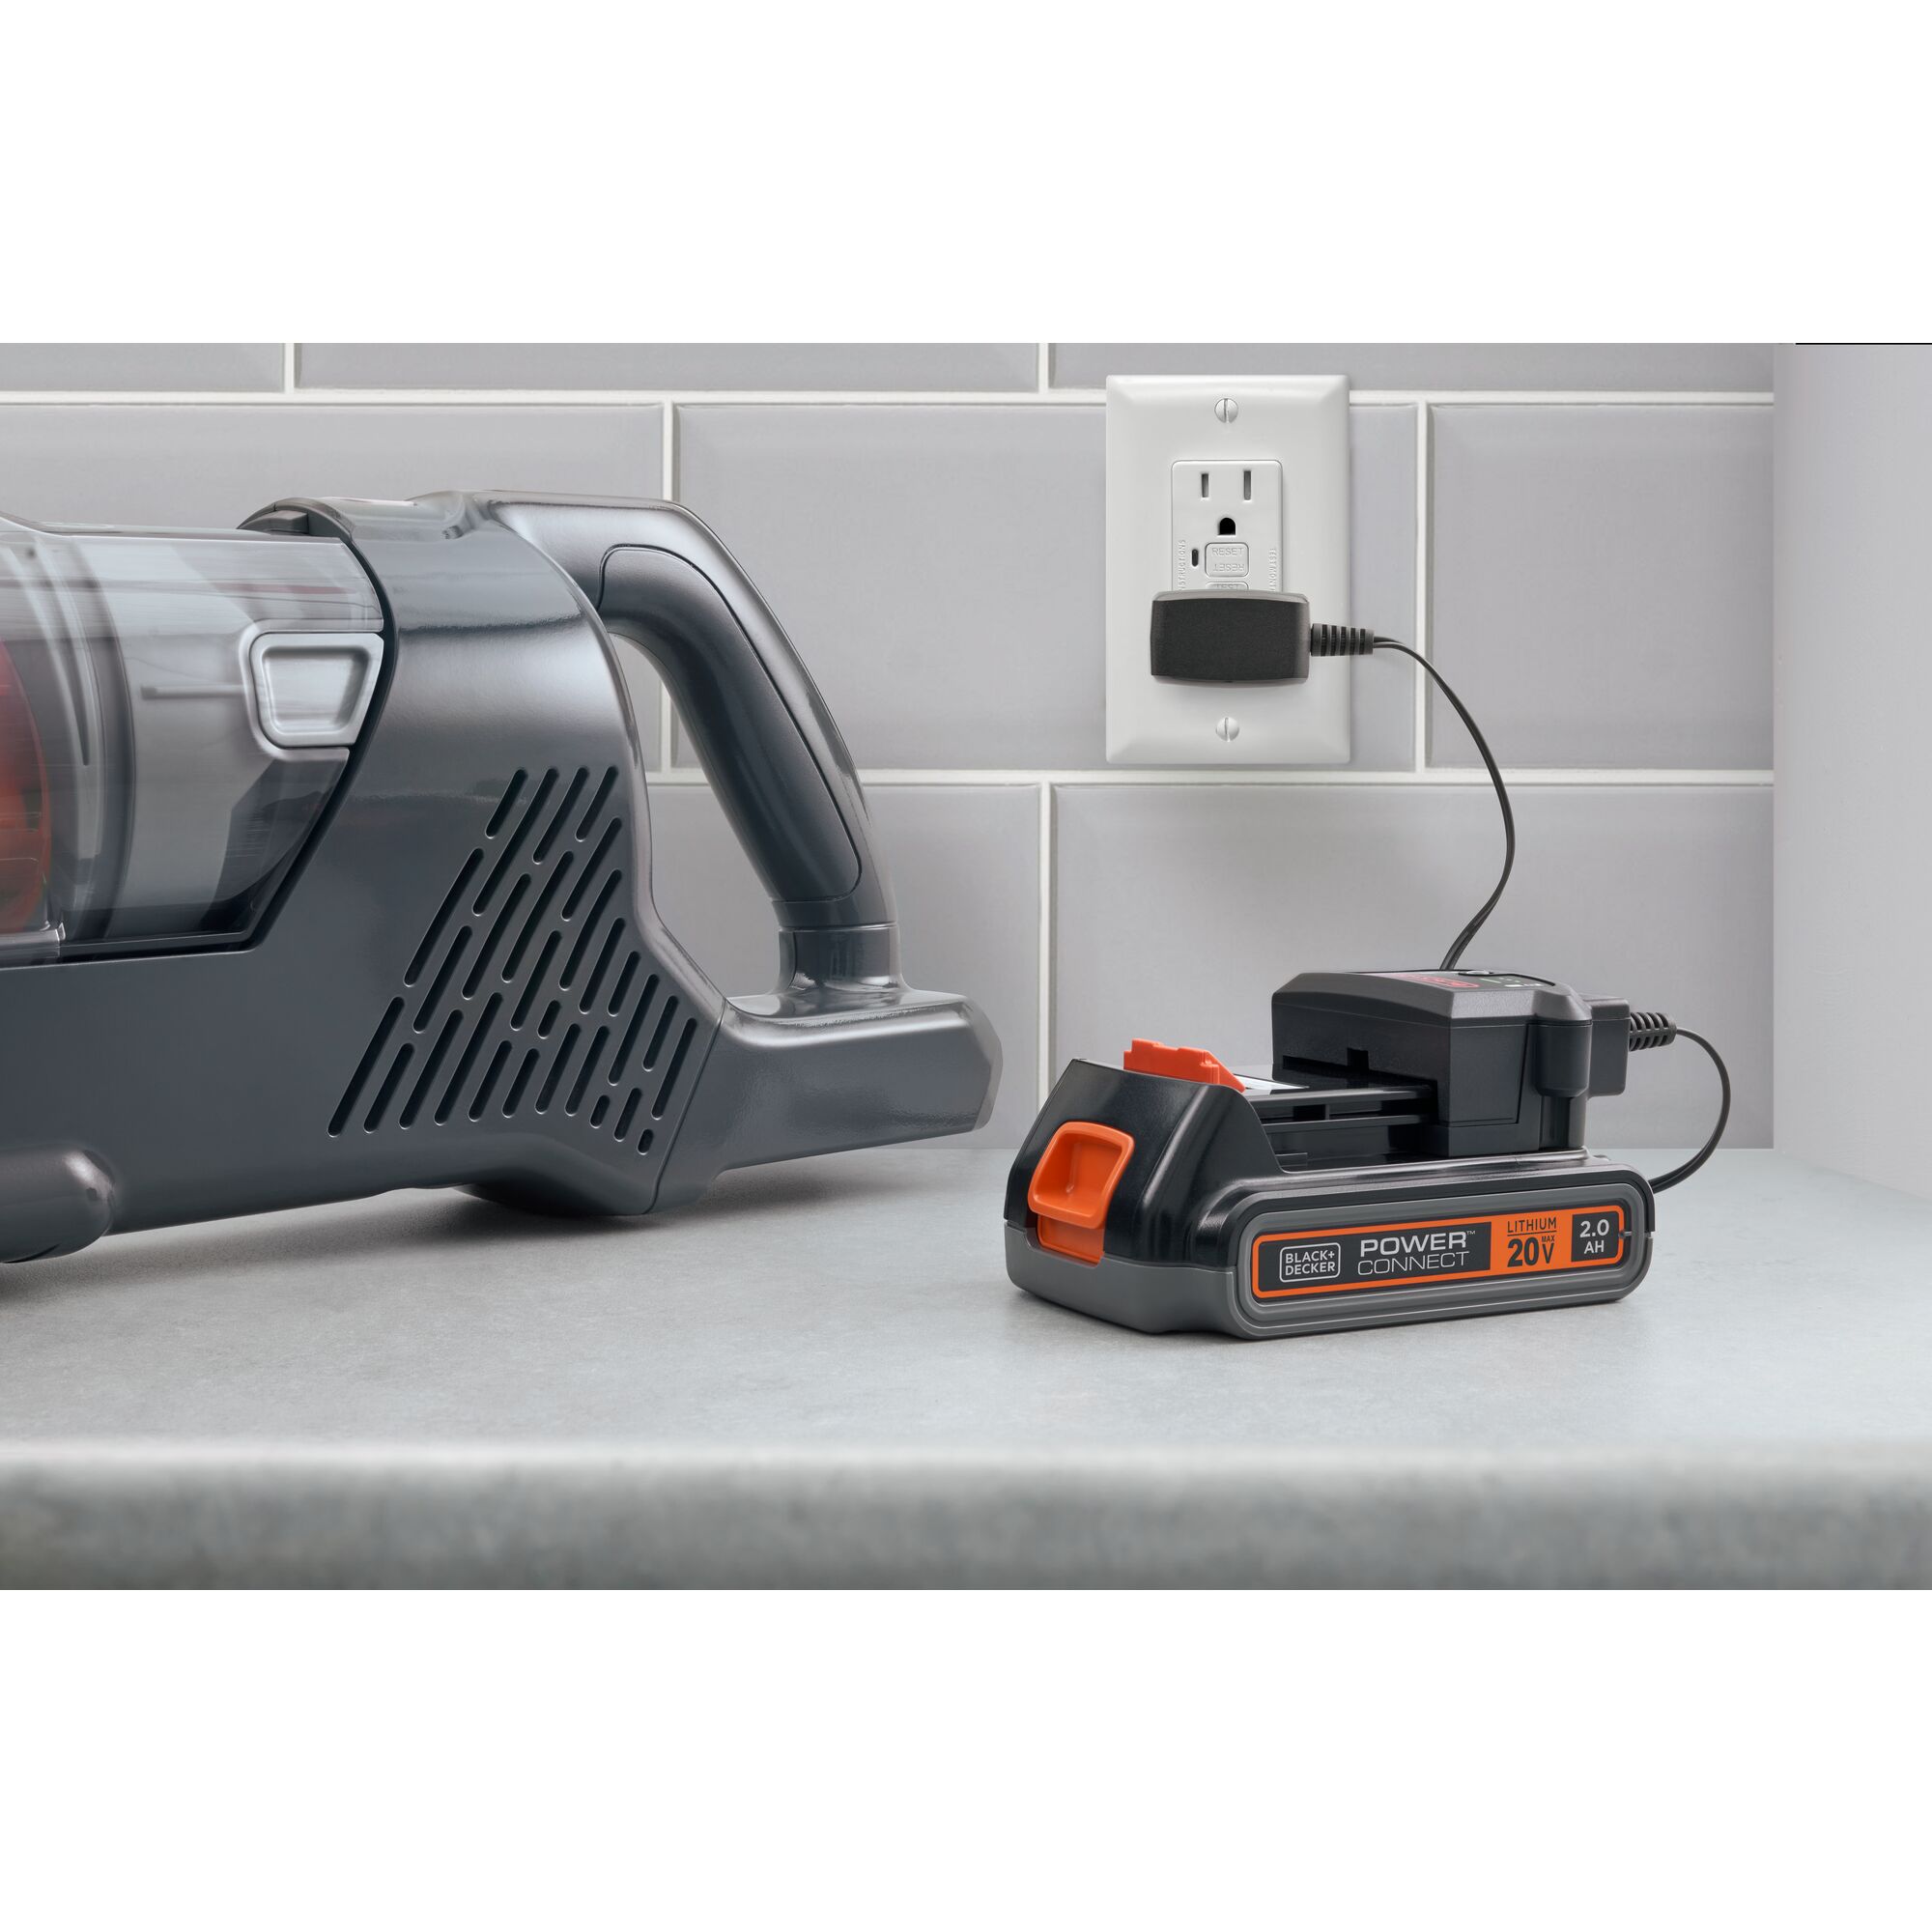 Black and decker 20 volt power series battery connteced to a plugged in charger on a countertop next to a powerseries vacuum